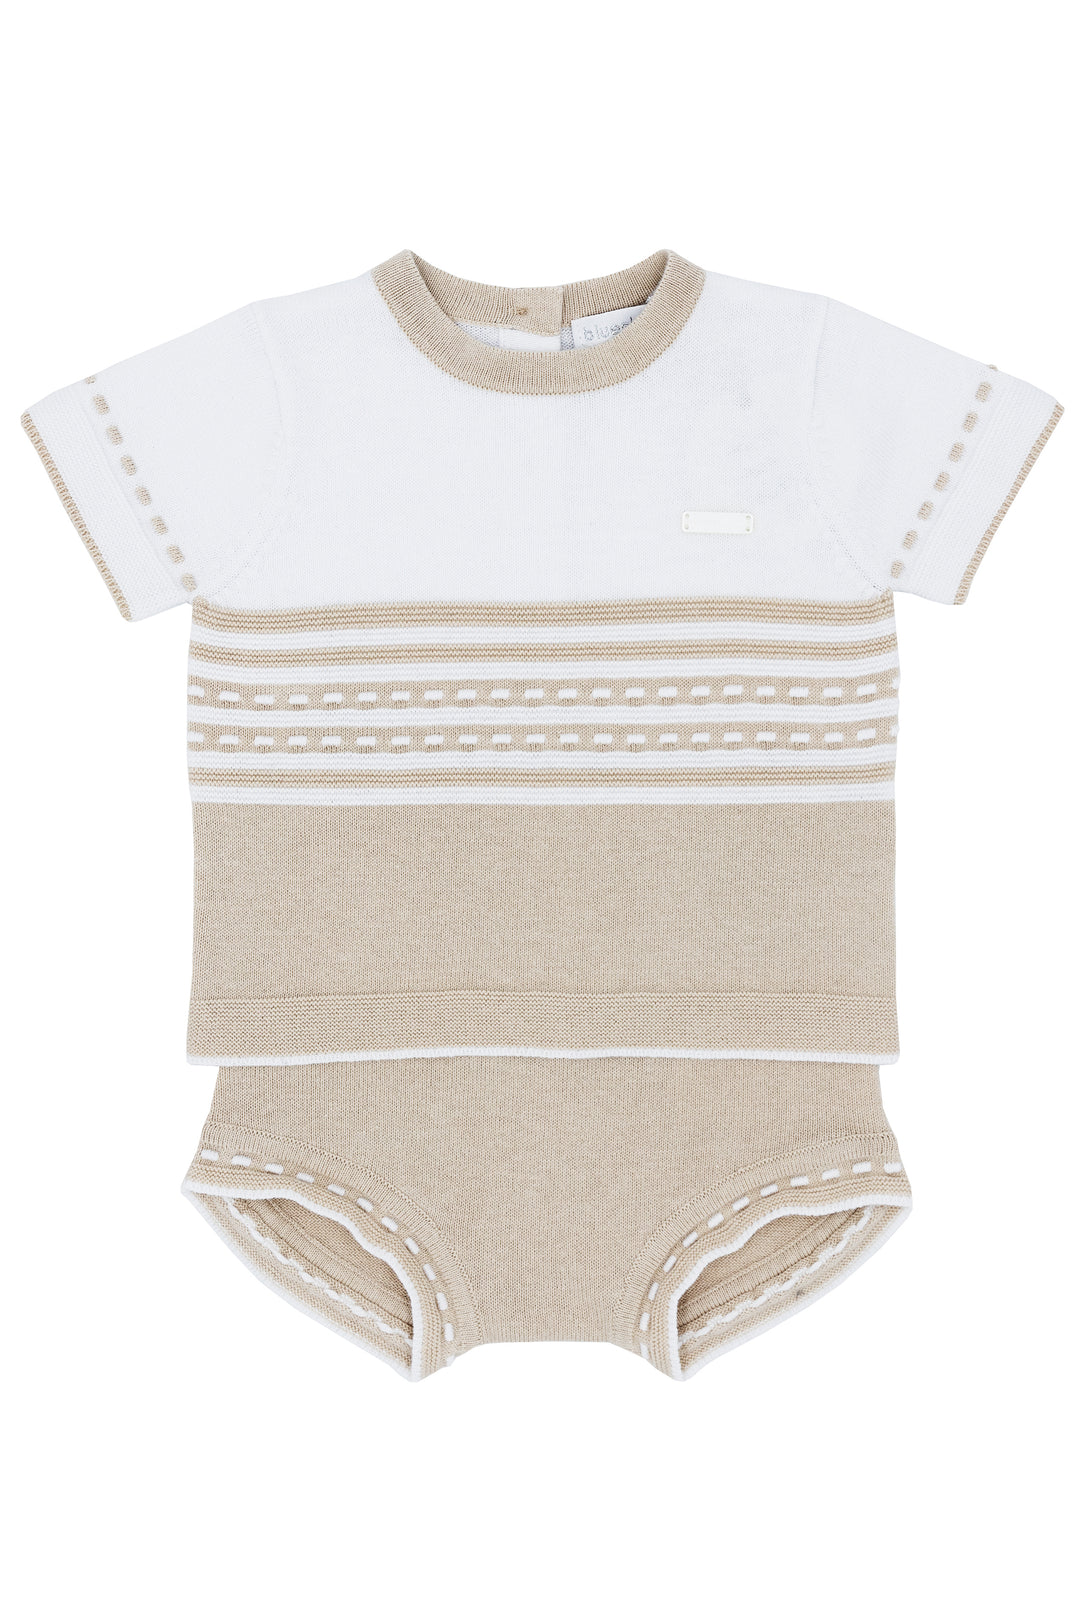 Blues Baby "Nathaniel" Beige Knit Top & Jam Pants | Millie and John